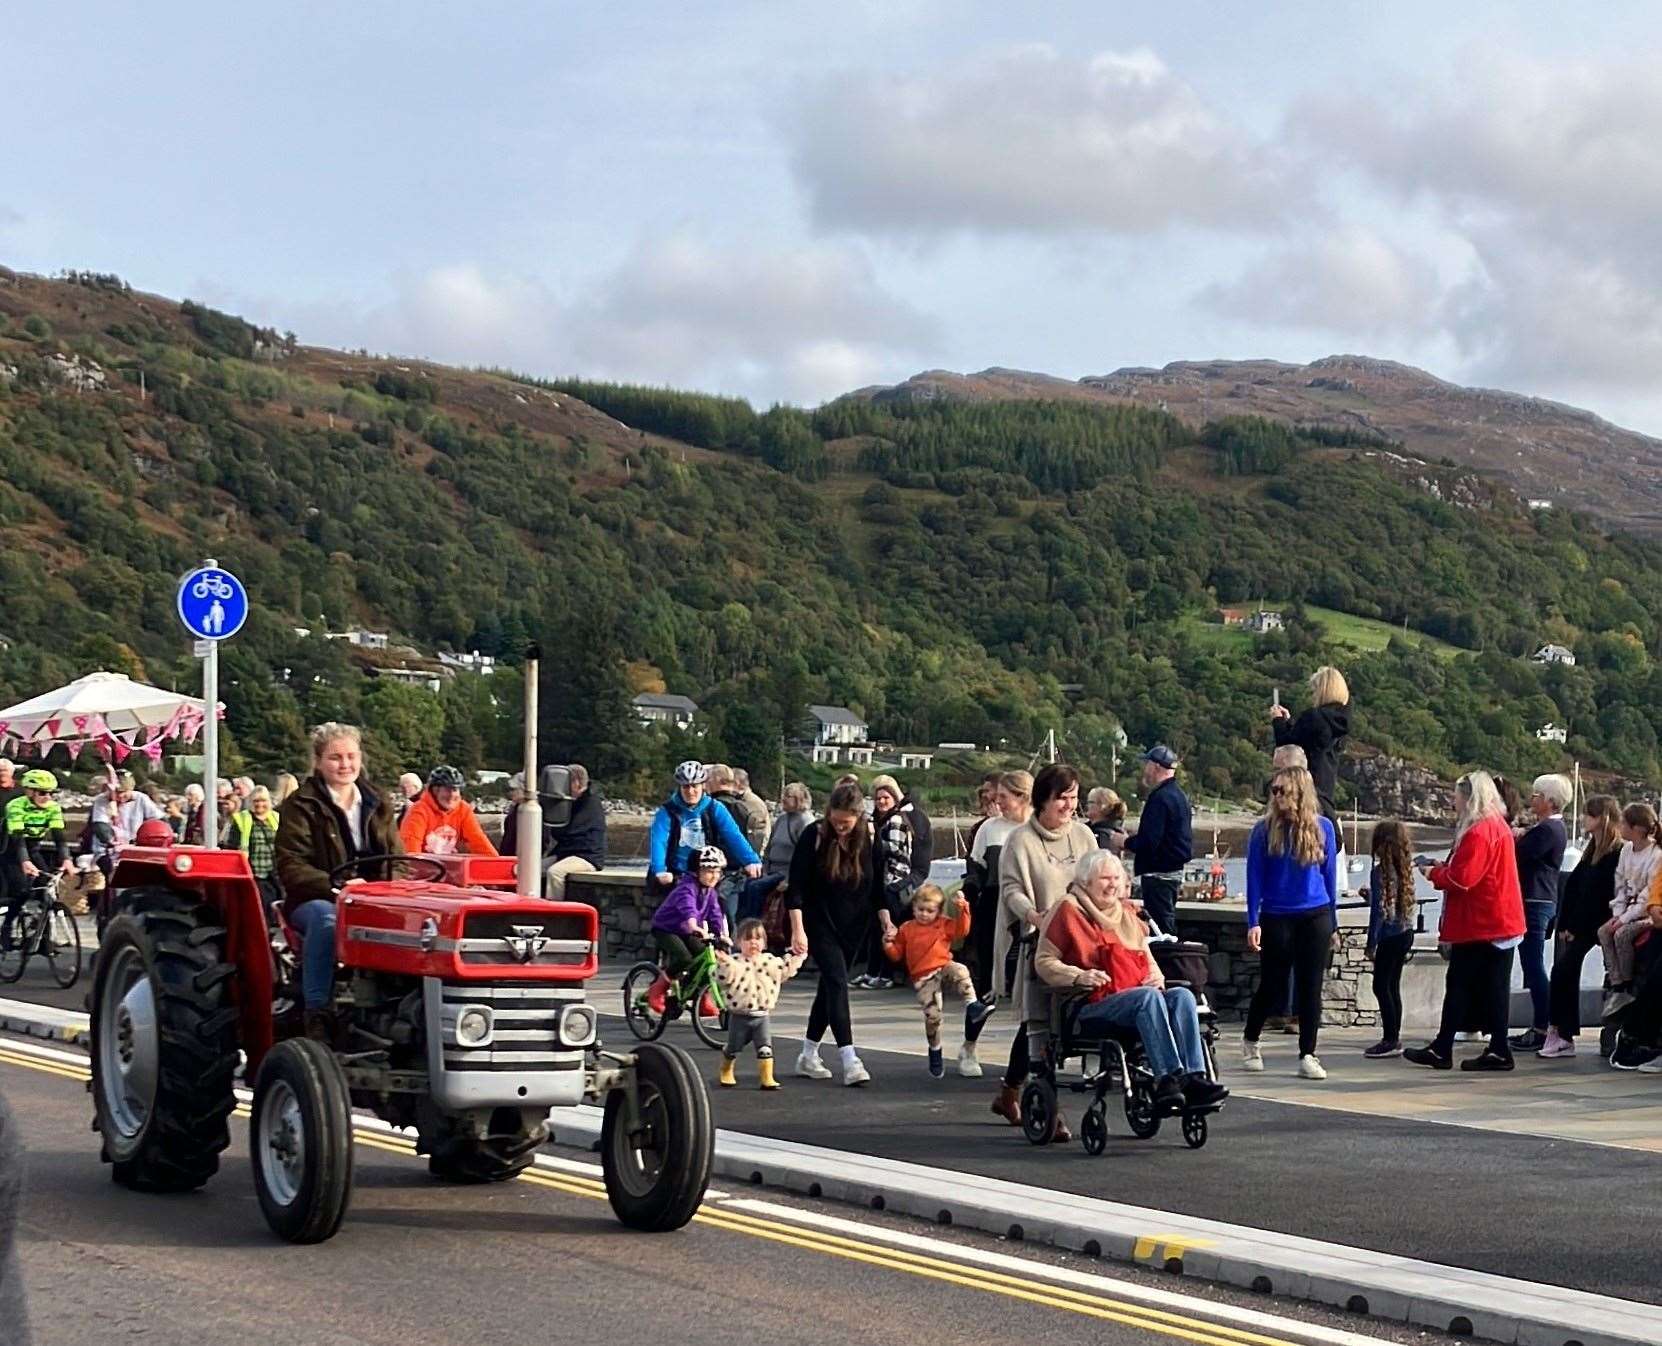 Carrie Urquhart on her tractor in the parade.